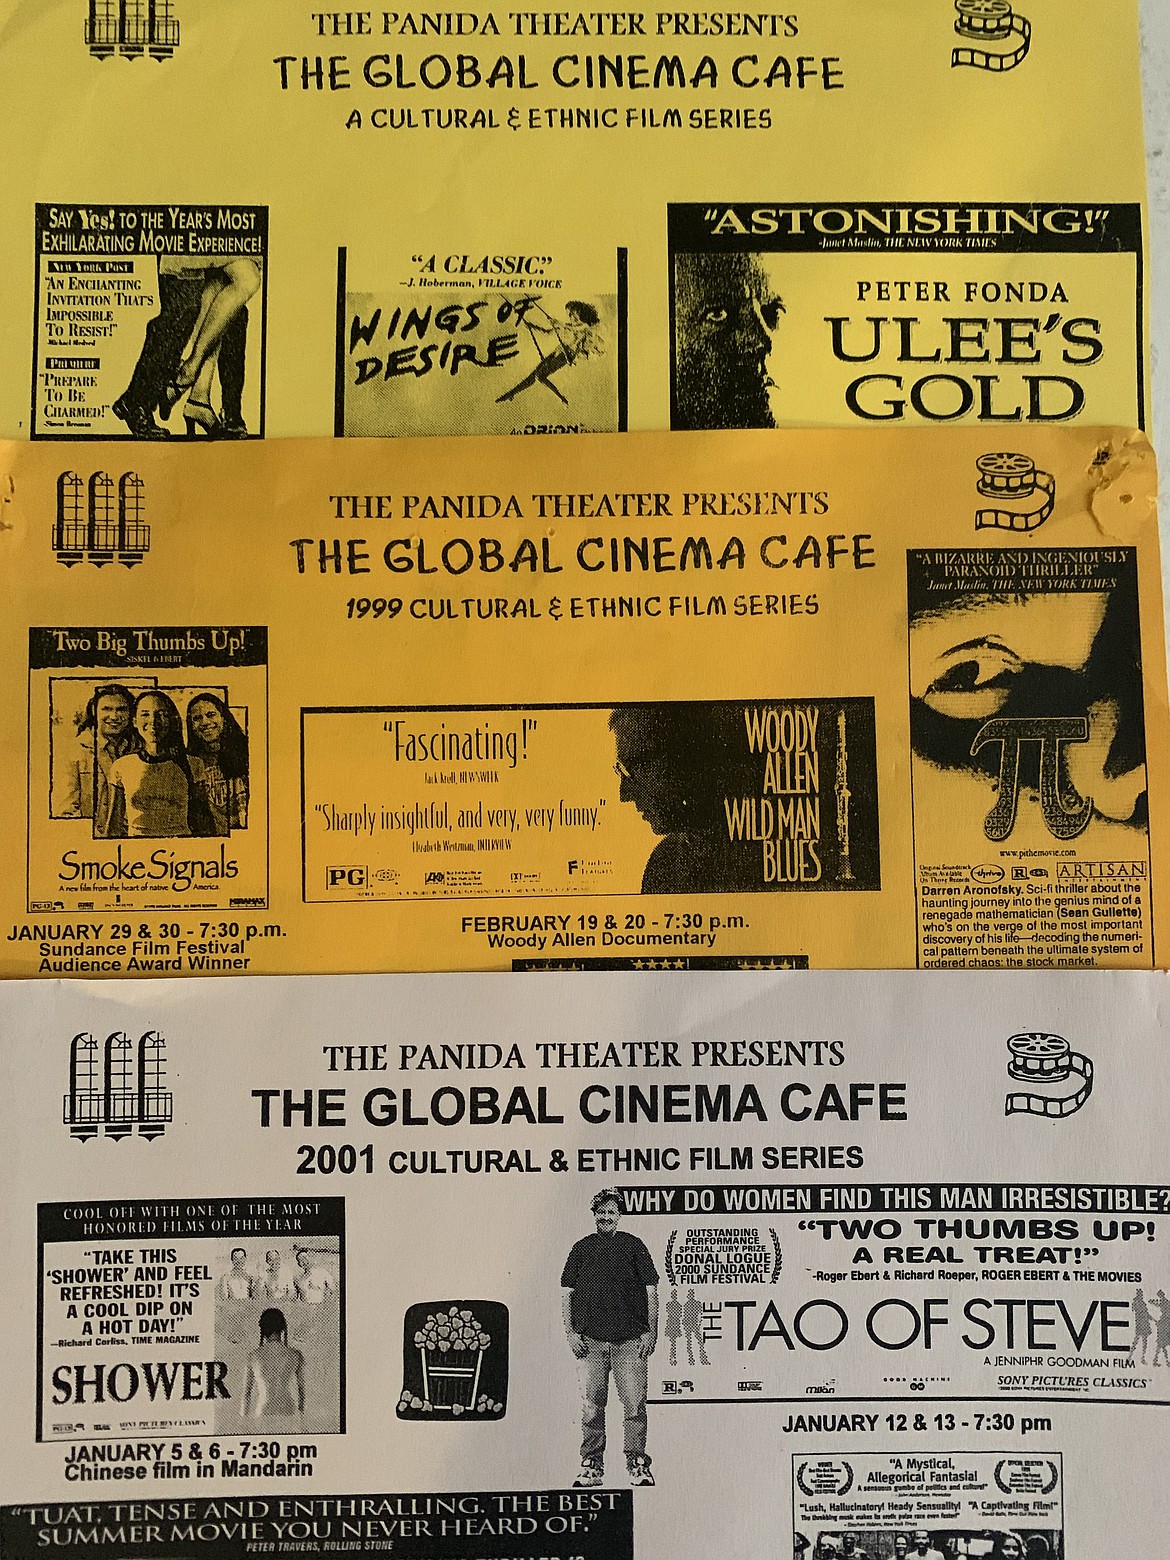 One sheets — a term used in indicate a standard-size poster in the motion picture industry — from the Panida's Global Cinema Series from 1998 to 2001.